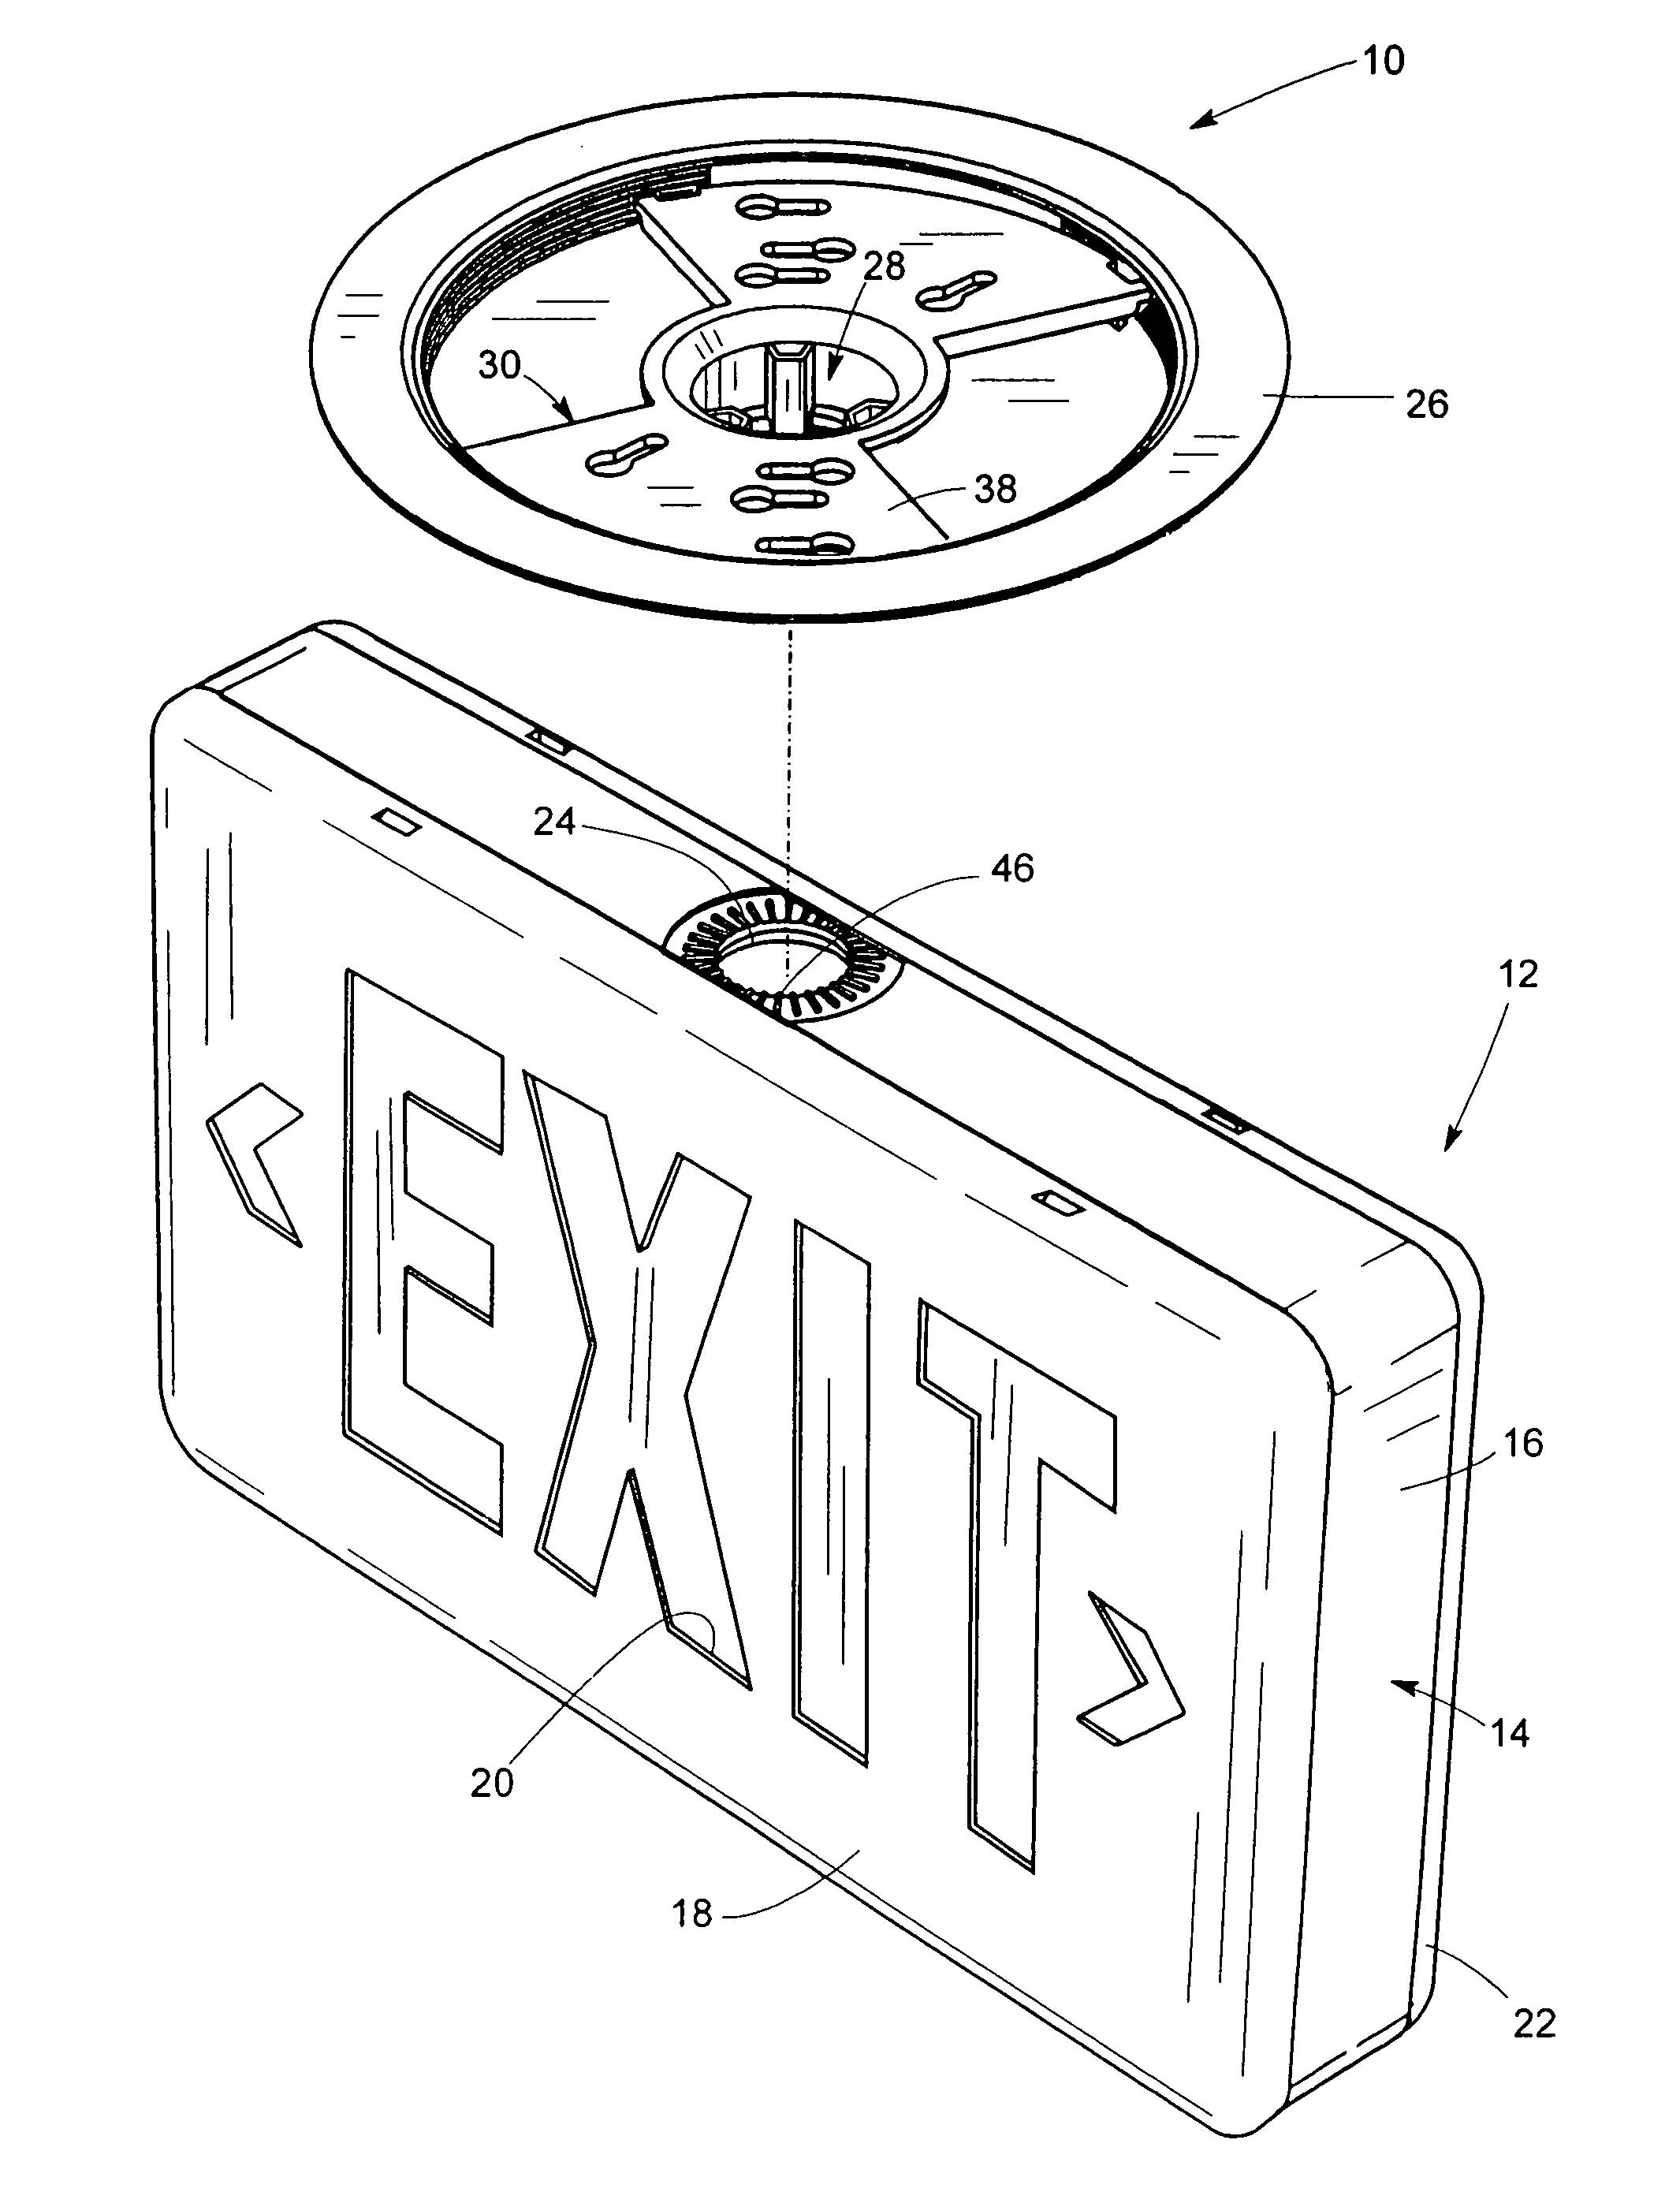 Mounting devices for exit signs and other fixtures